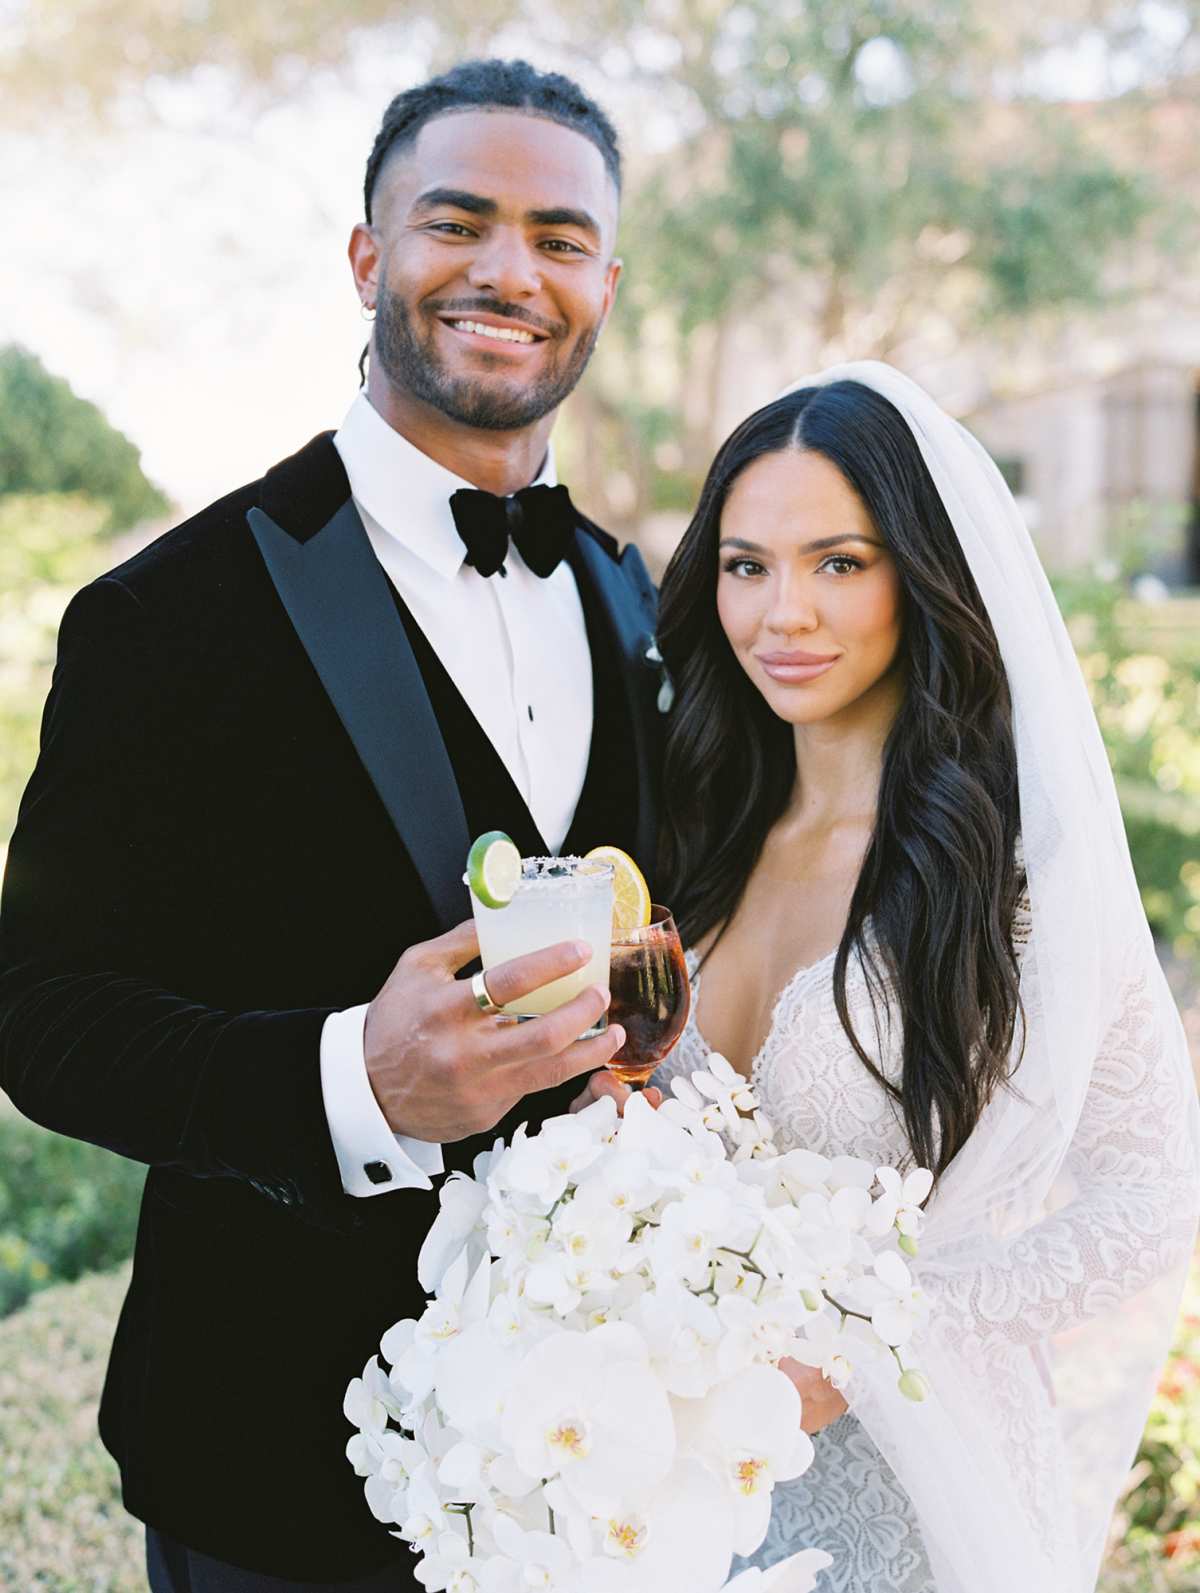 The Bachelor's Sydney Hightower Is Married to Football Player Fred Warner: See Photos